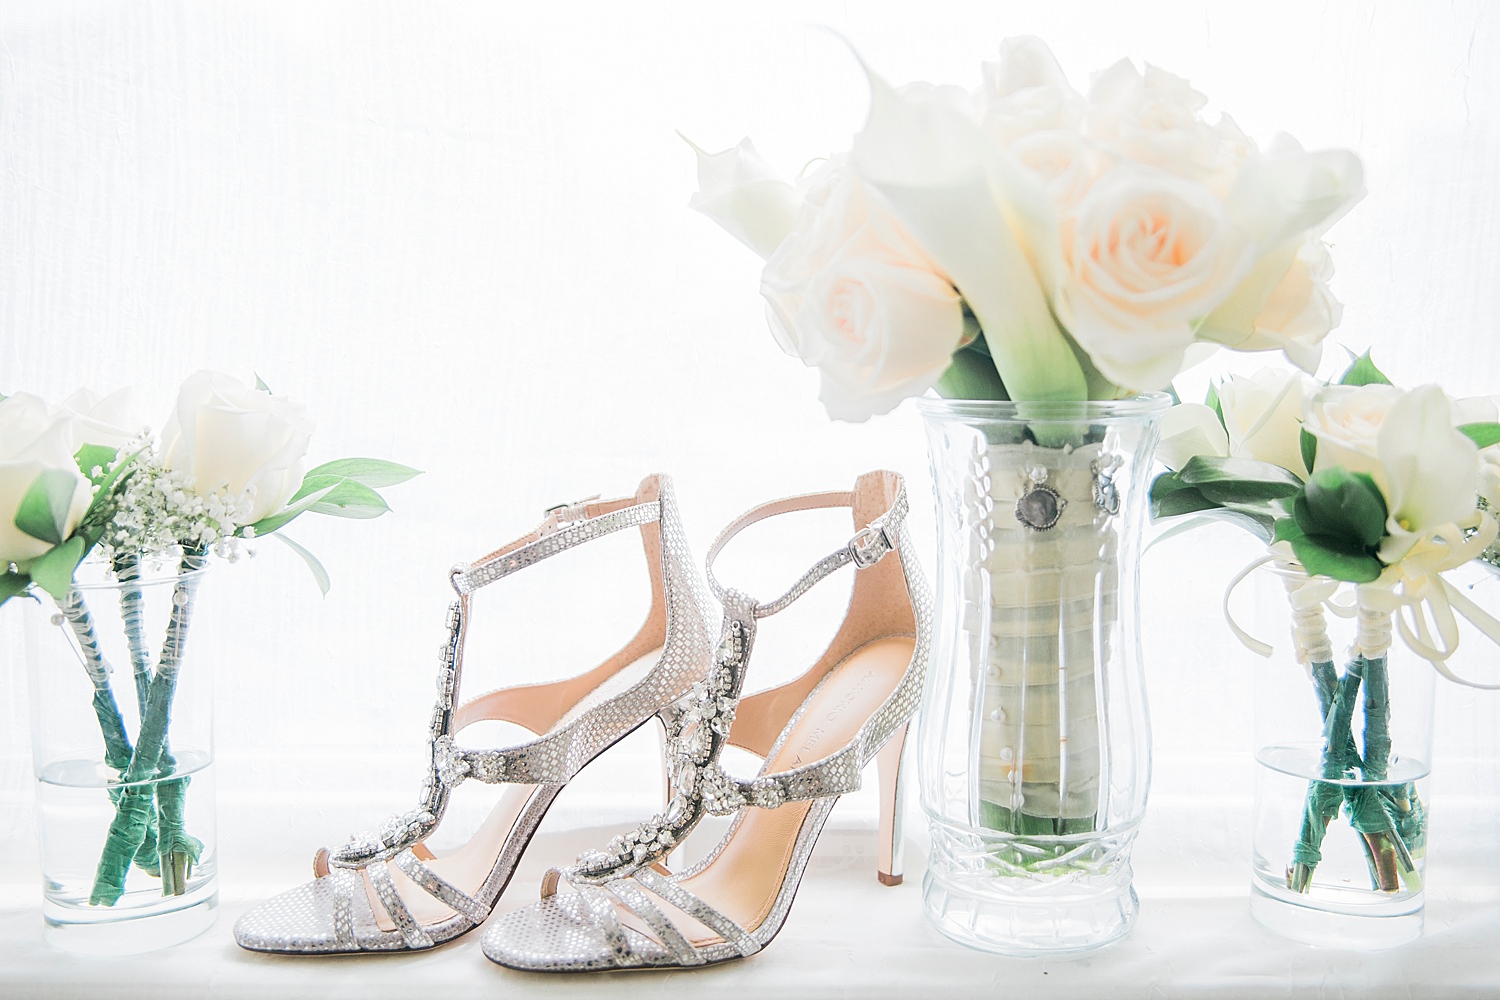 Silver heels and white rose bouquets sit on a window ledge